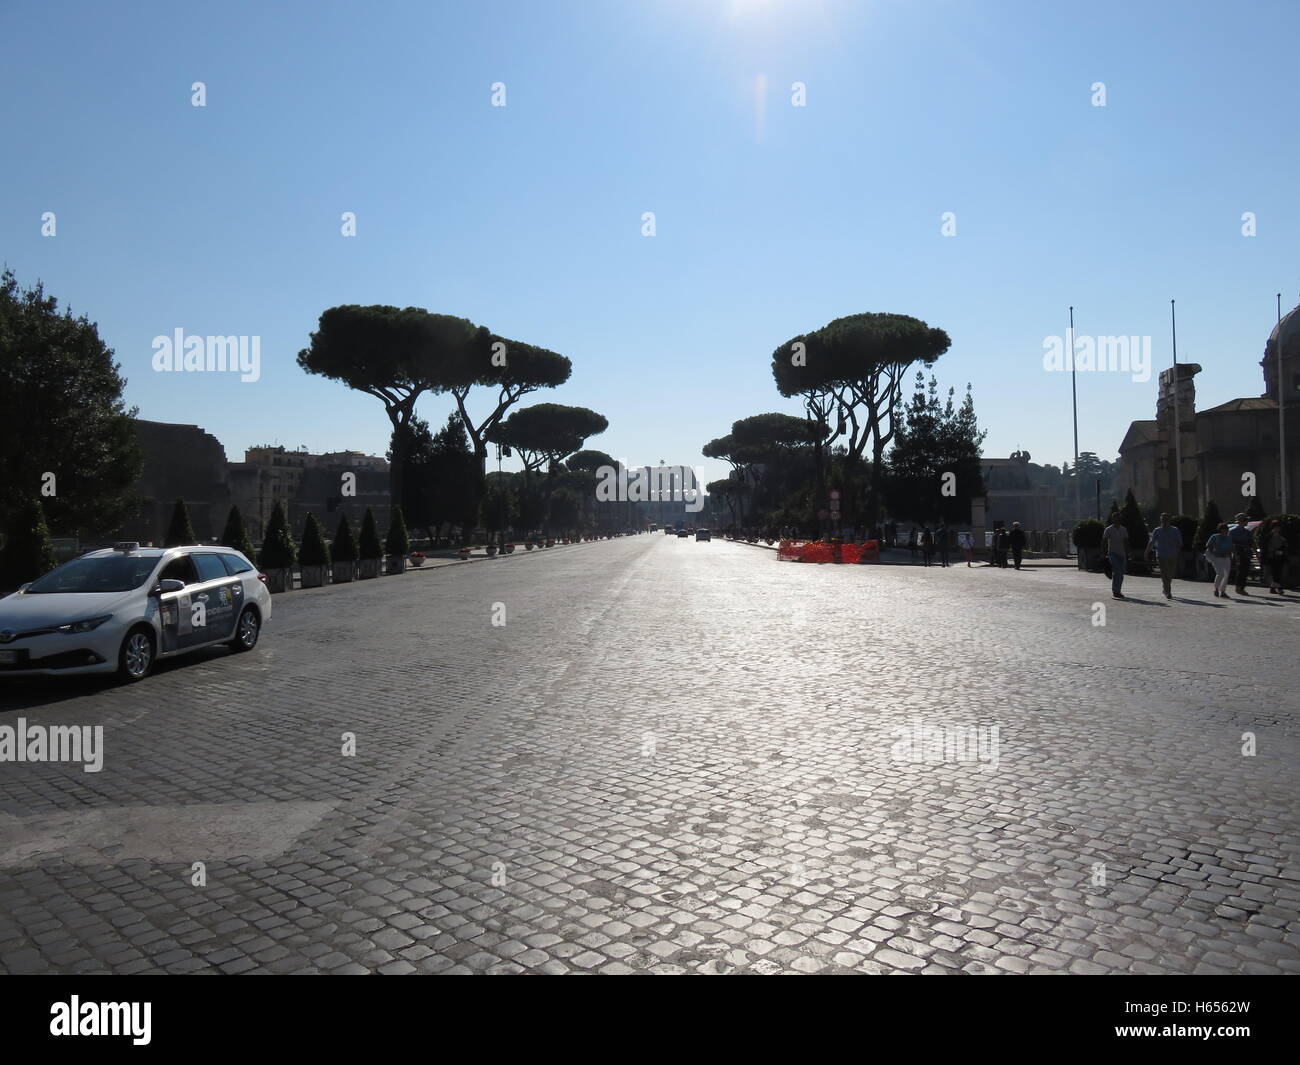 Crossing the Via del Fori Imperiali Rome looking towards the Colosseum in the distance Stock Photo